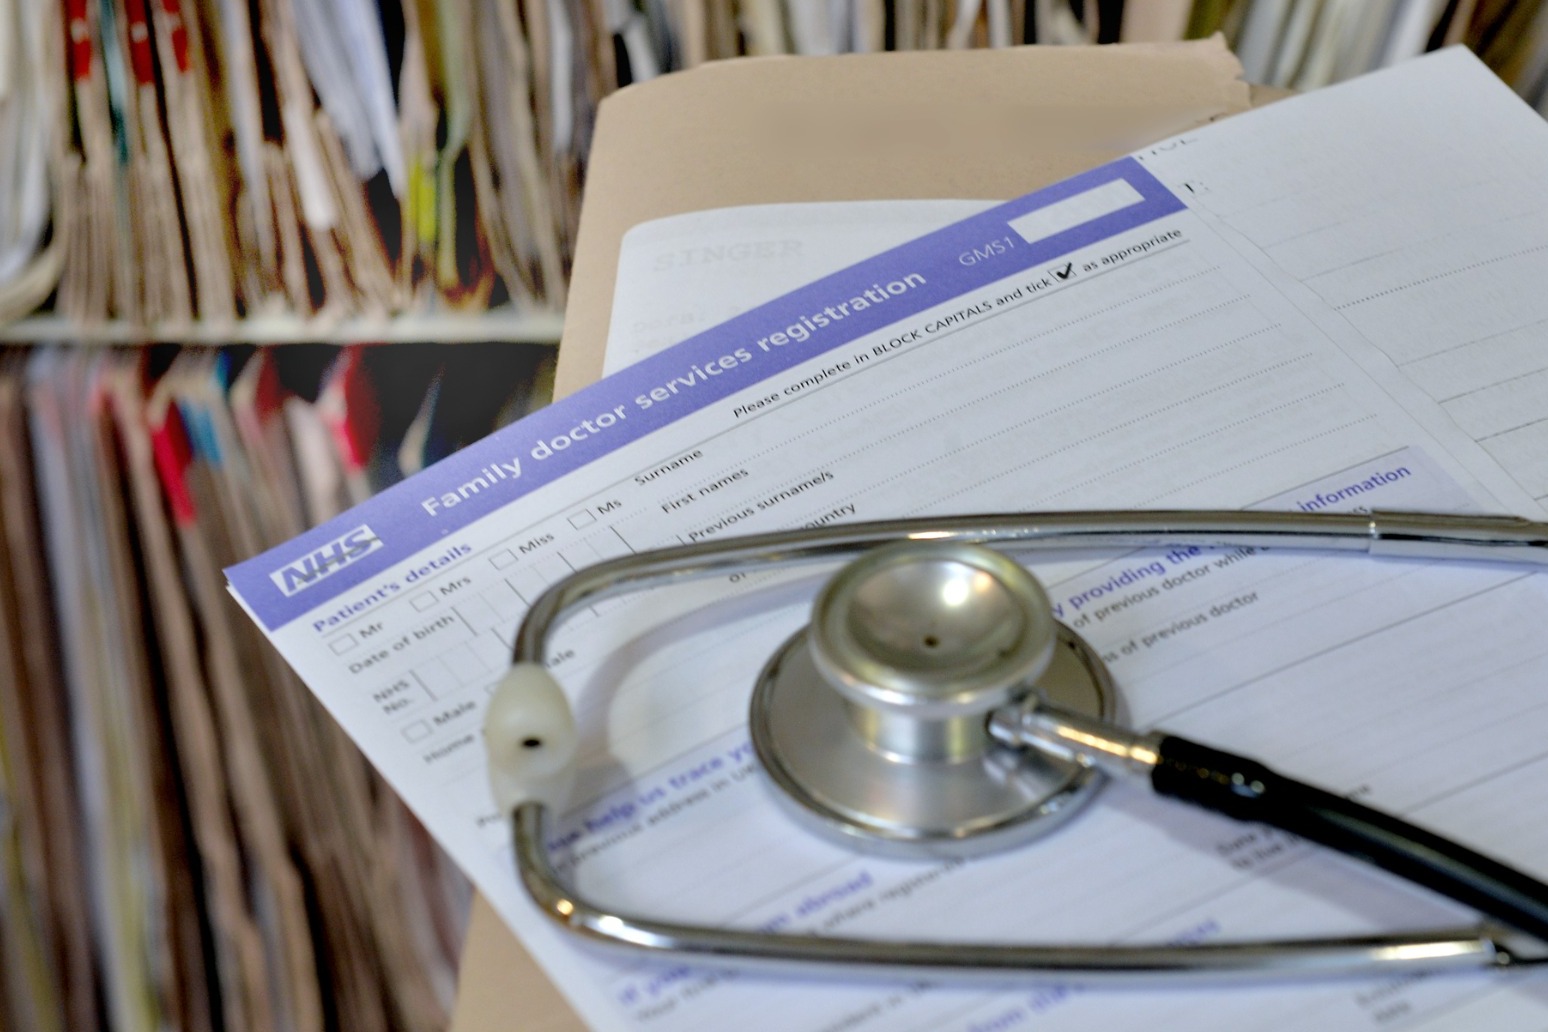 GP practices could be named and shamed as appointment ‘league tables’ published 